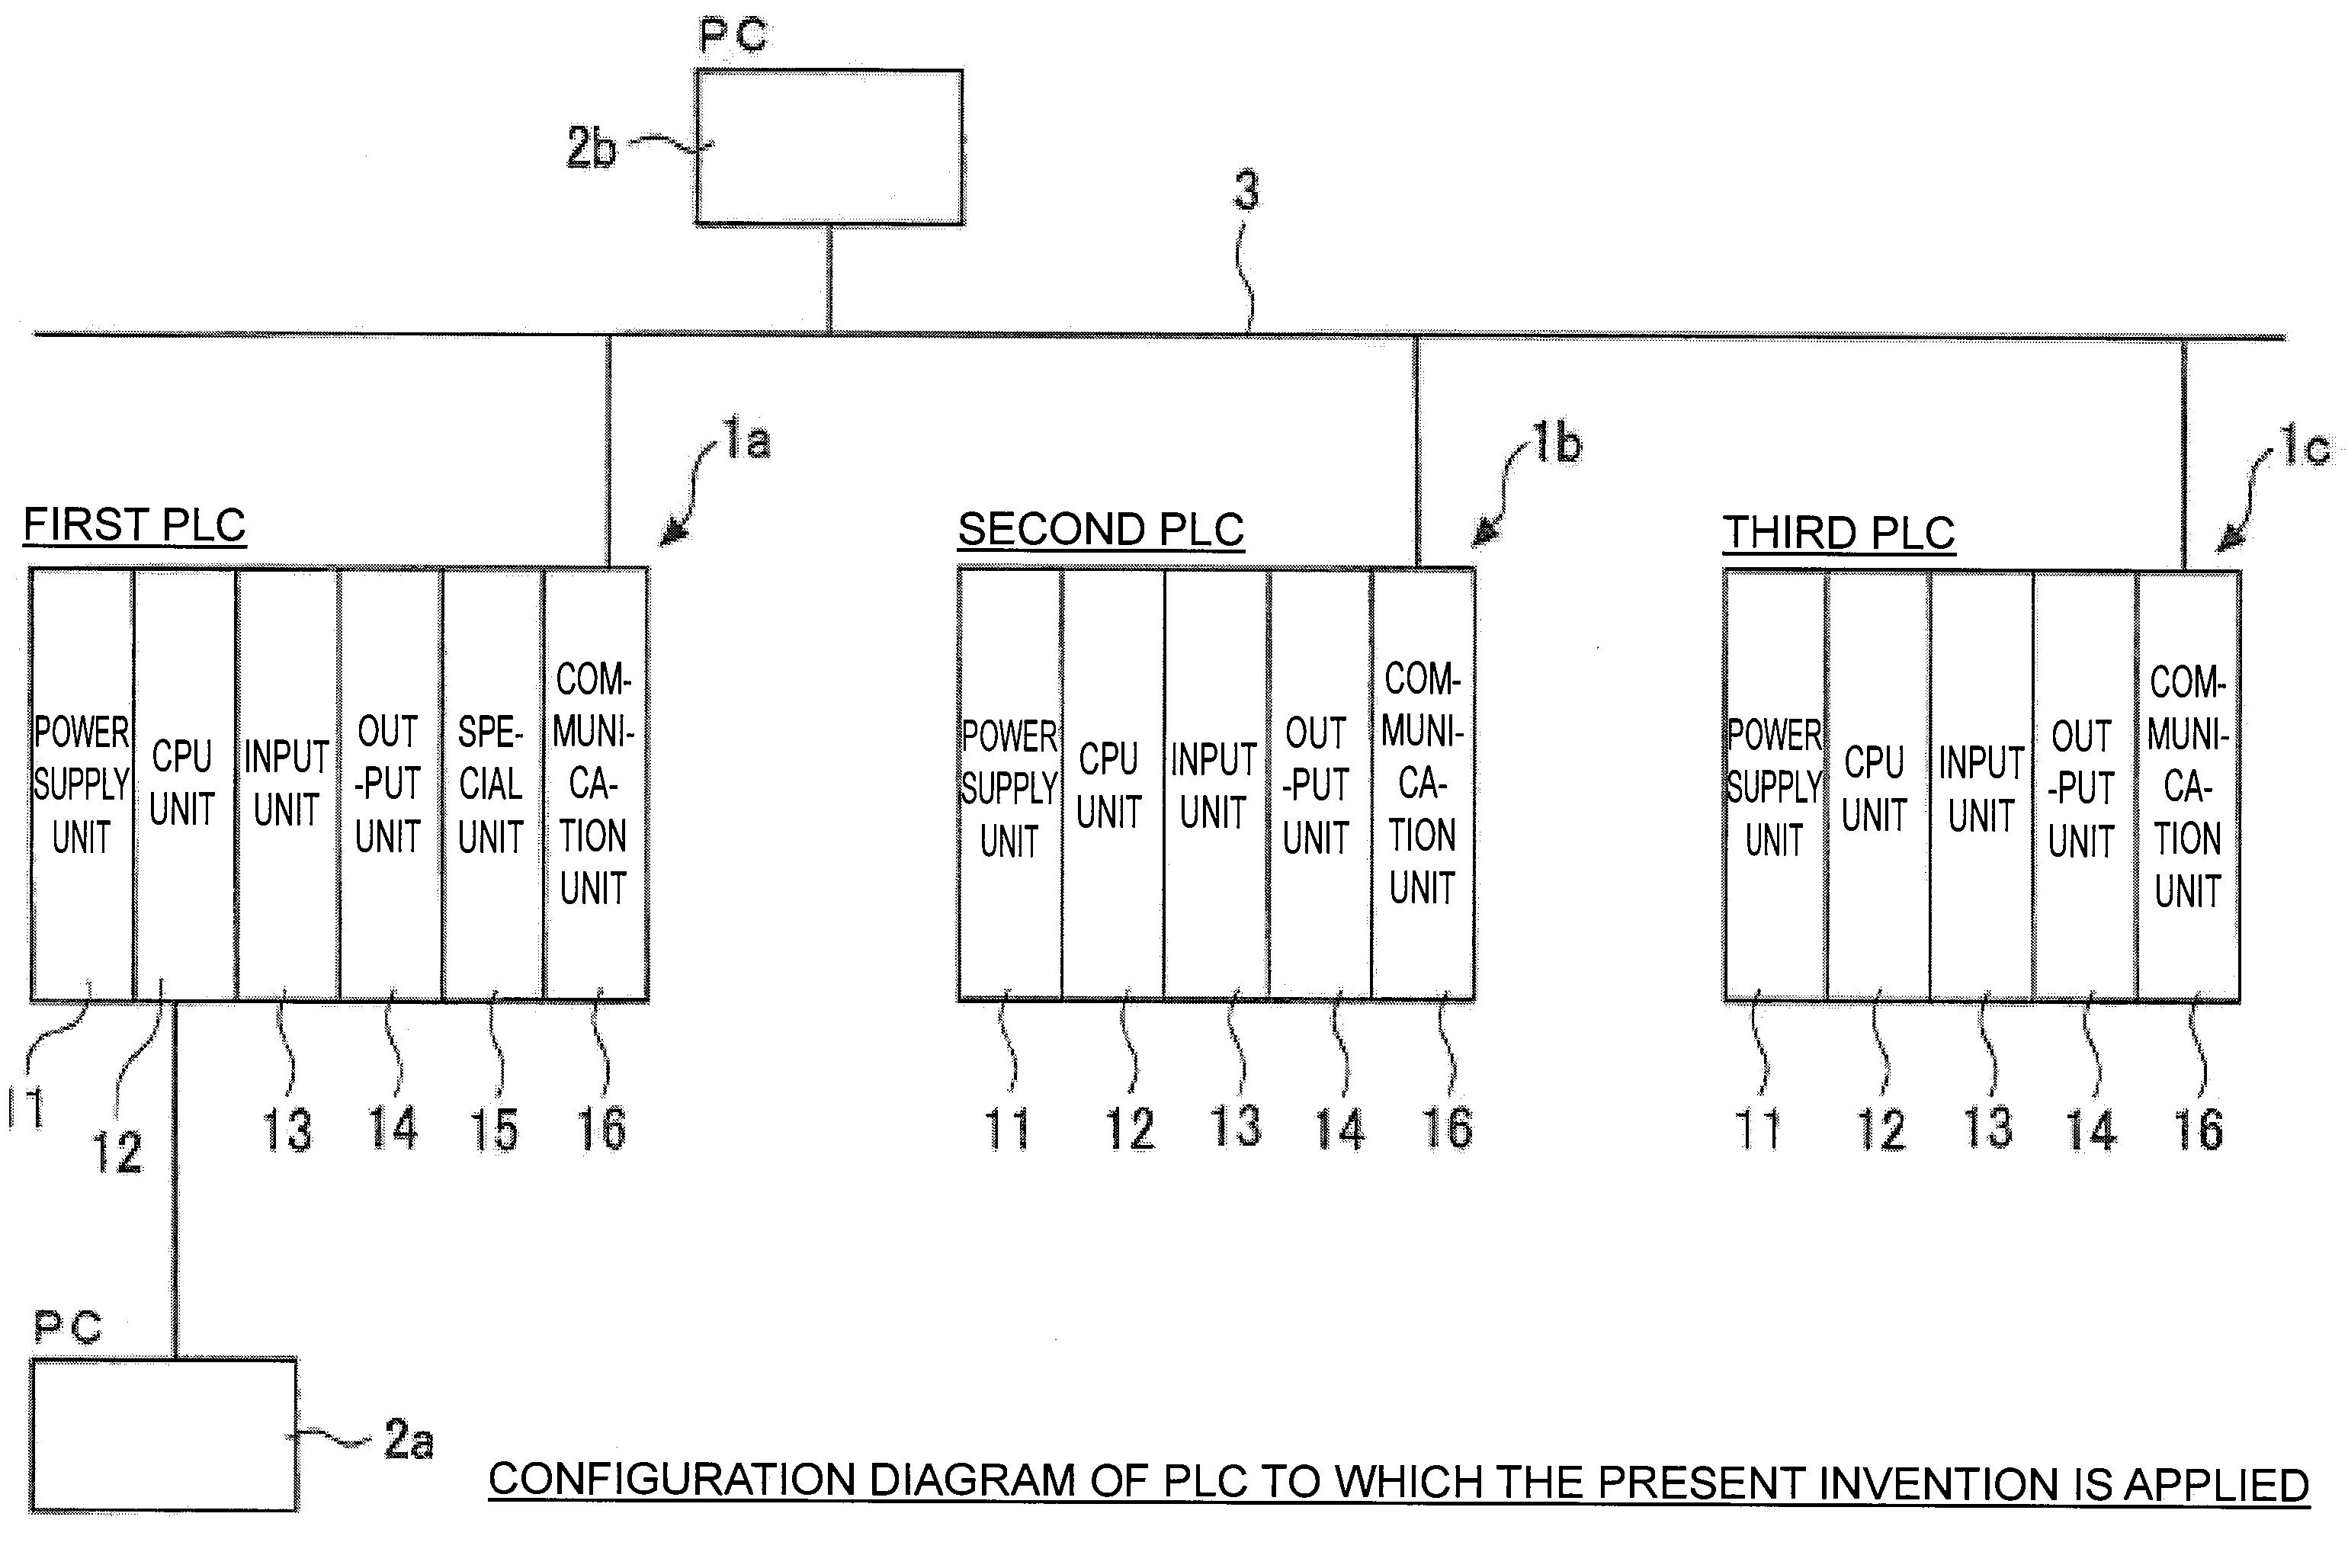 Programmable controller